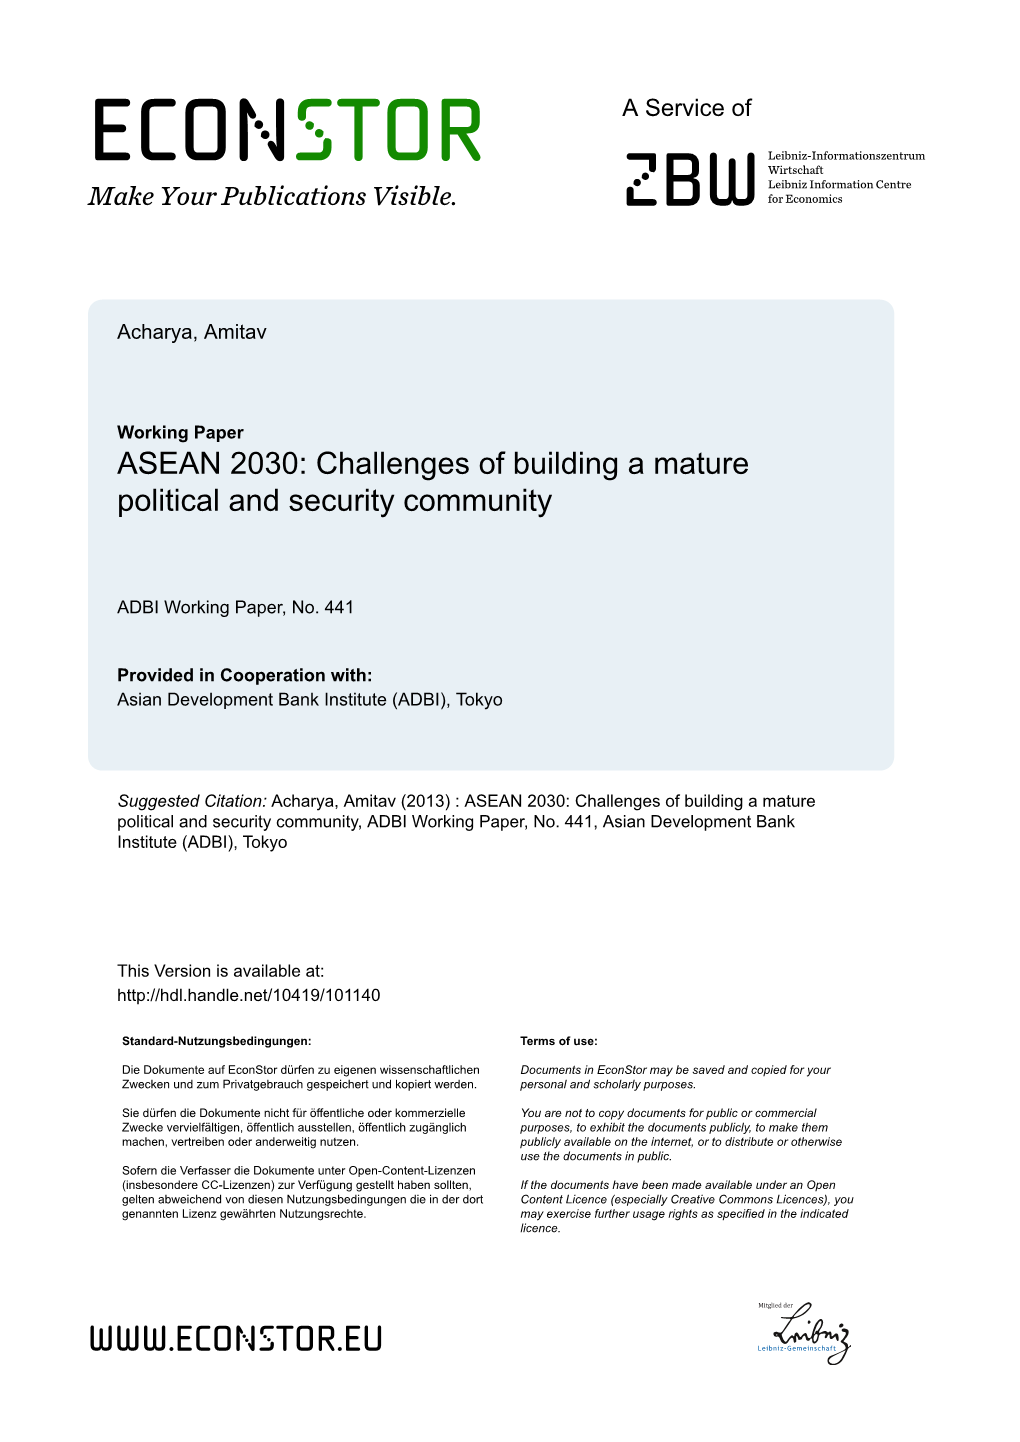 ASEAN 2030: Challenges of Building a Mature Political and Security Community